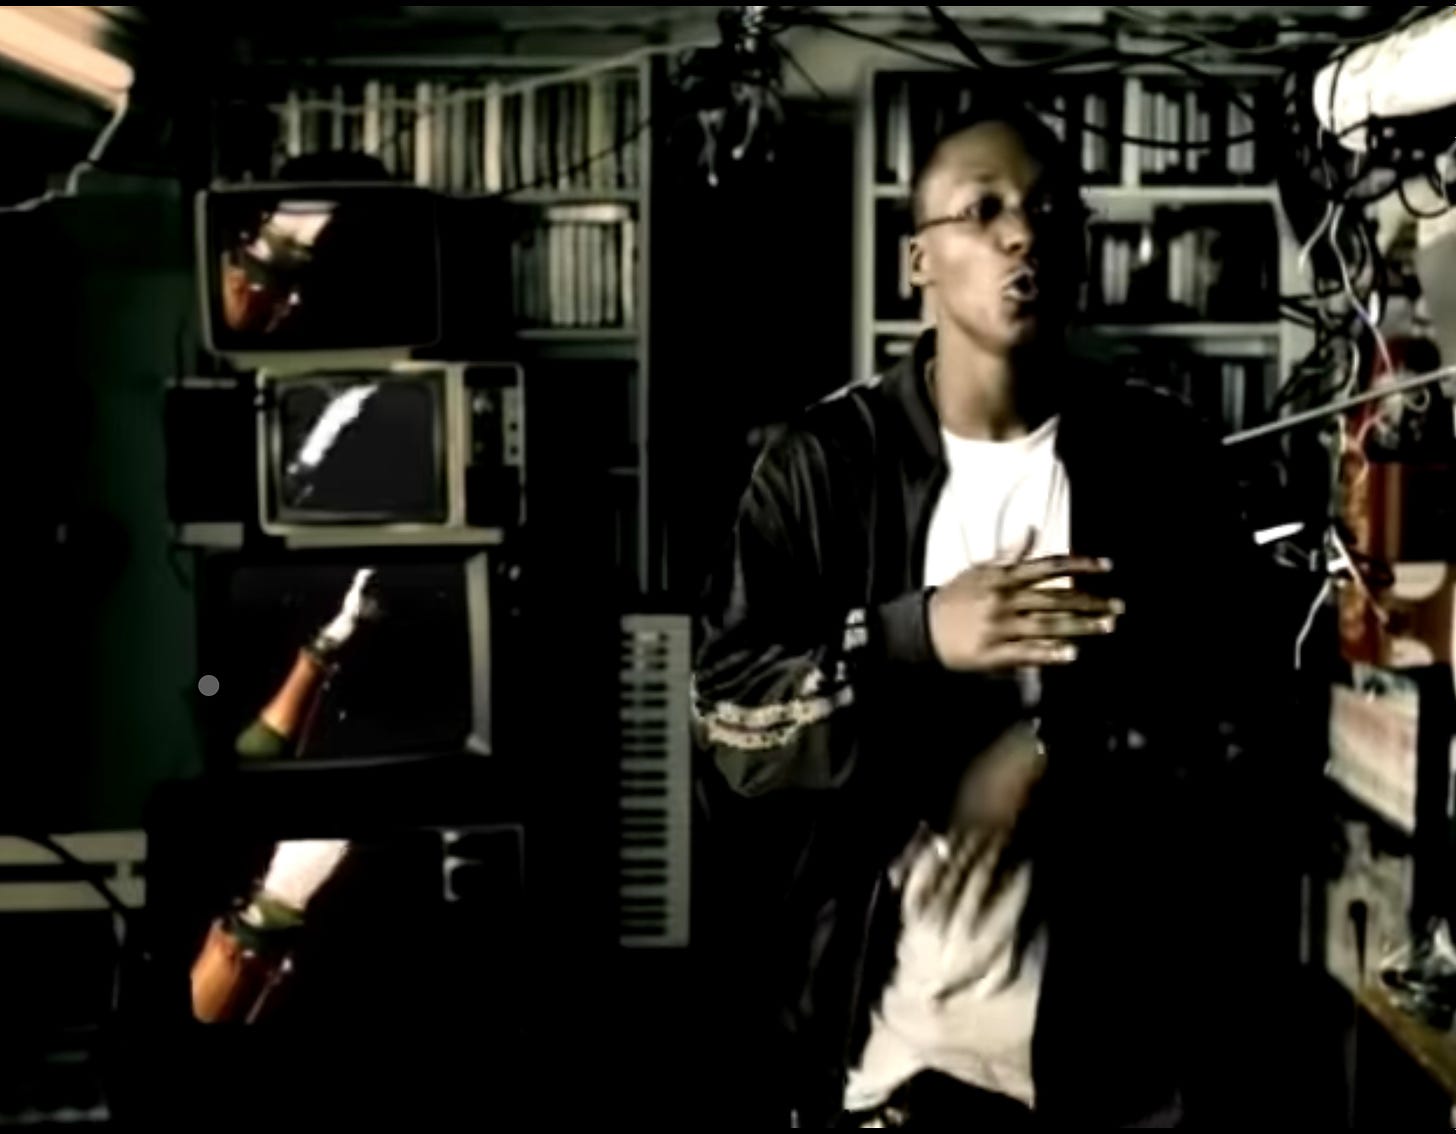 Lupe Fiasco raps in Daydreamin’, “where’s the champagne? We need champagne?” In a (very 2007s) media room— rectangular boxed TVs are stacked behind him with champagne bursting out of the bottle.